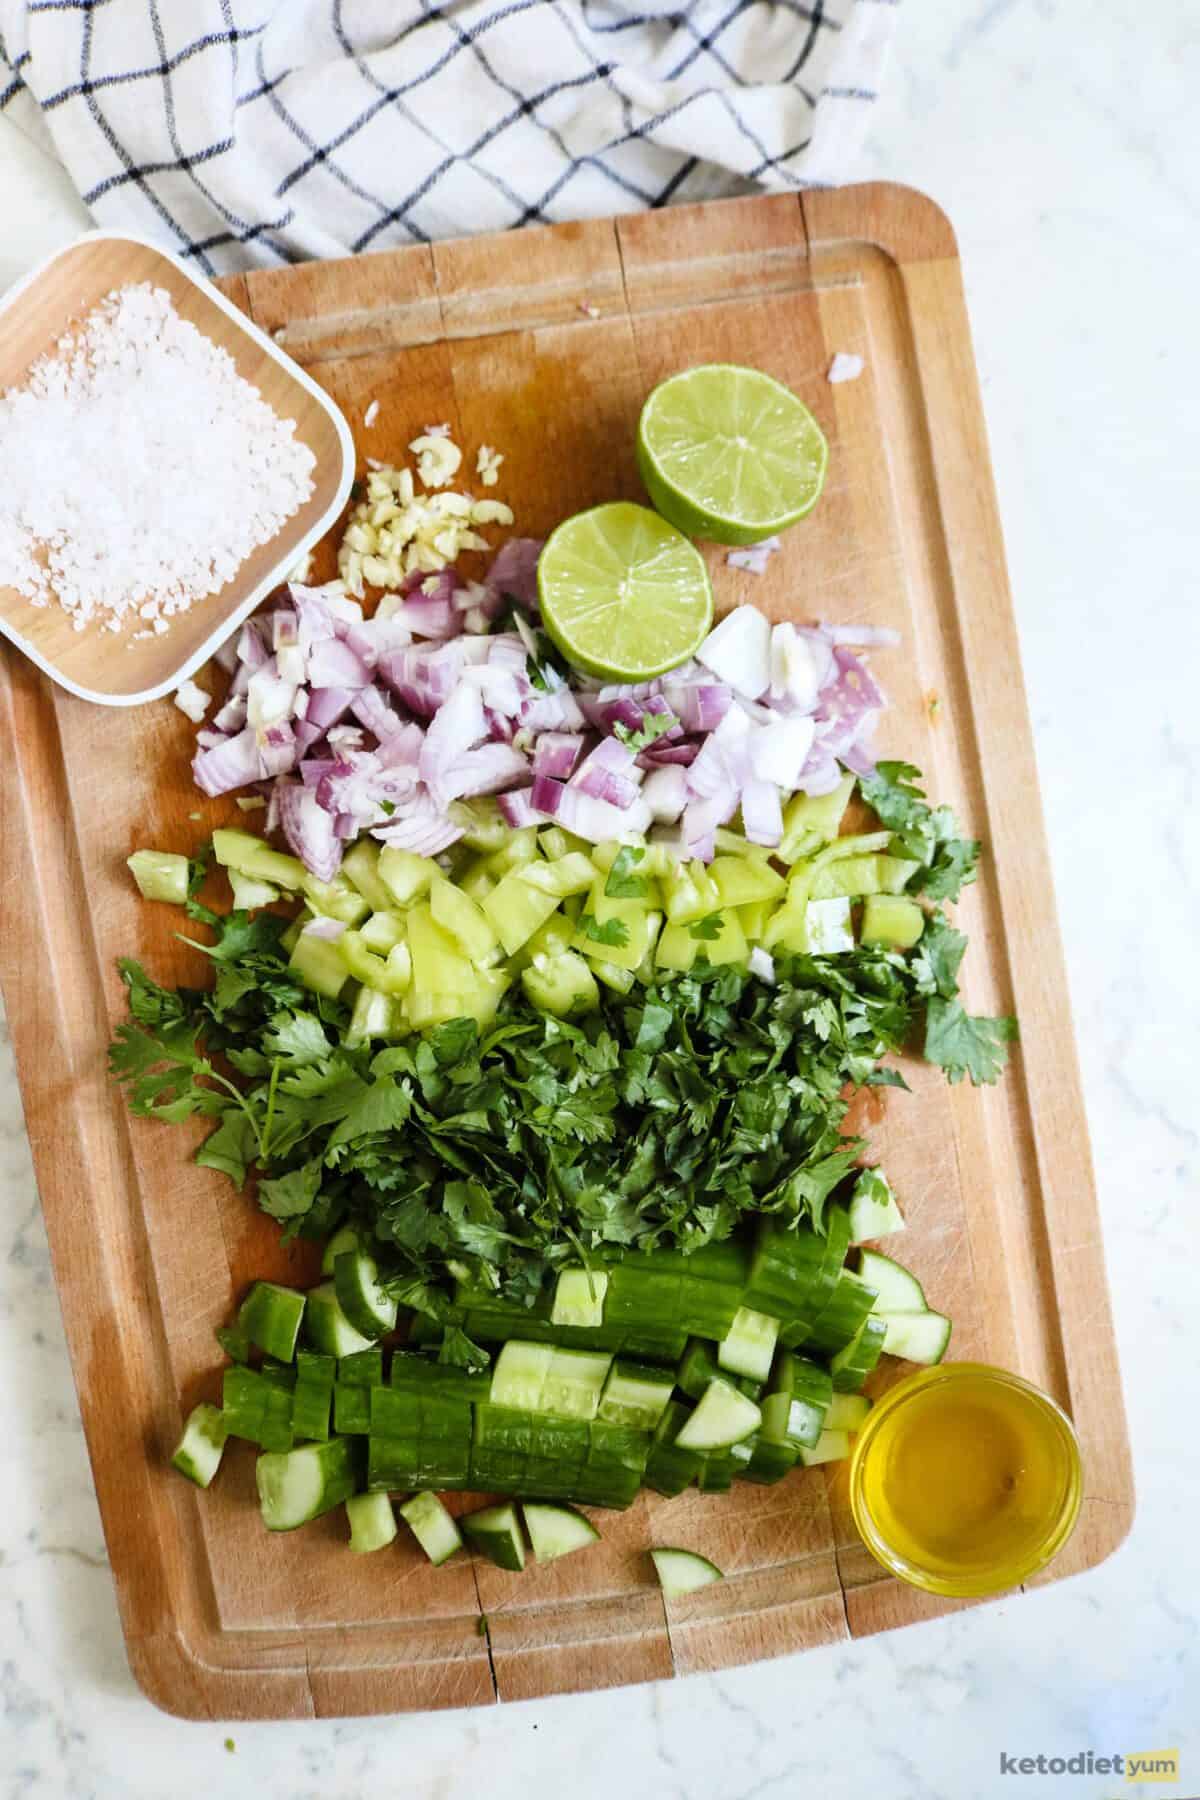 Chopping board with diced red onion, green bell pepper, cilantro, cucumber, garlic, lime, olive oil and flaky salt on a table with a kitchen cloth